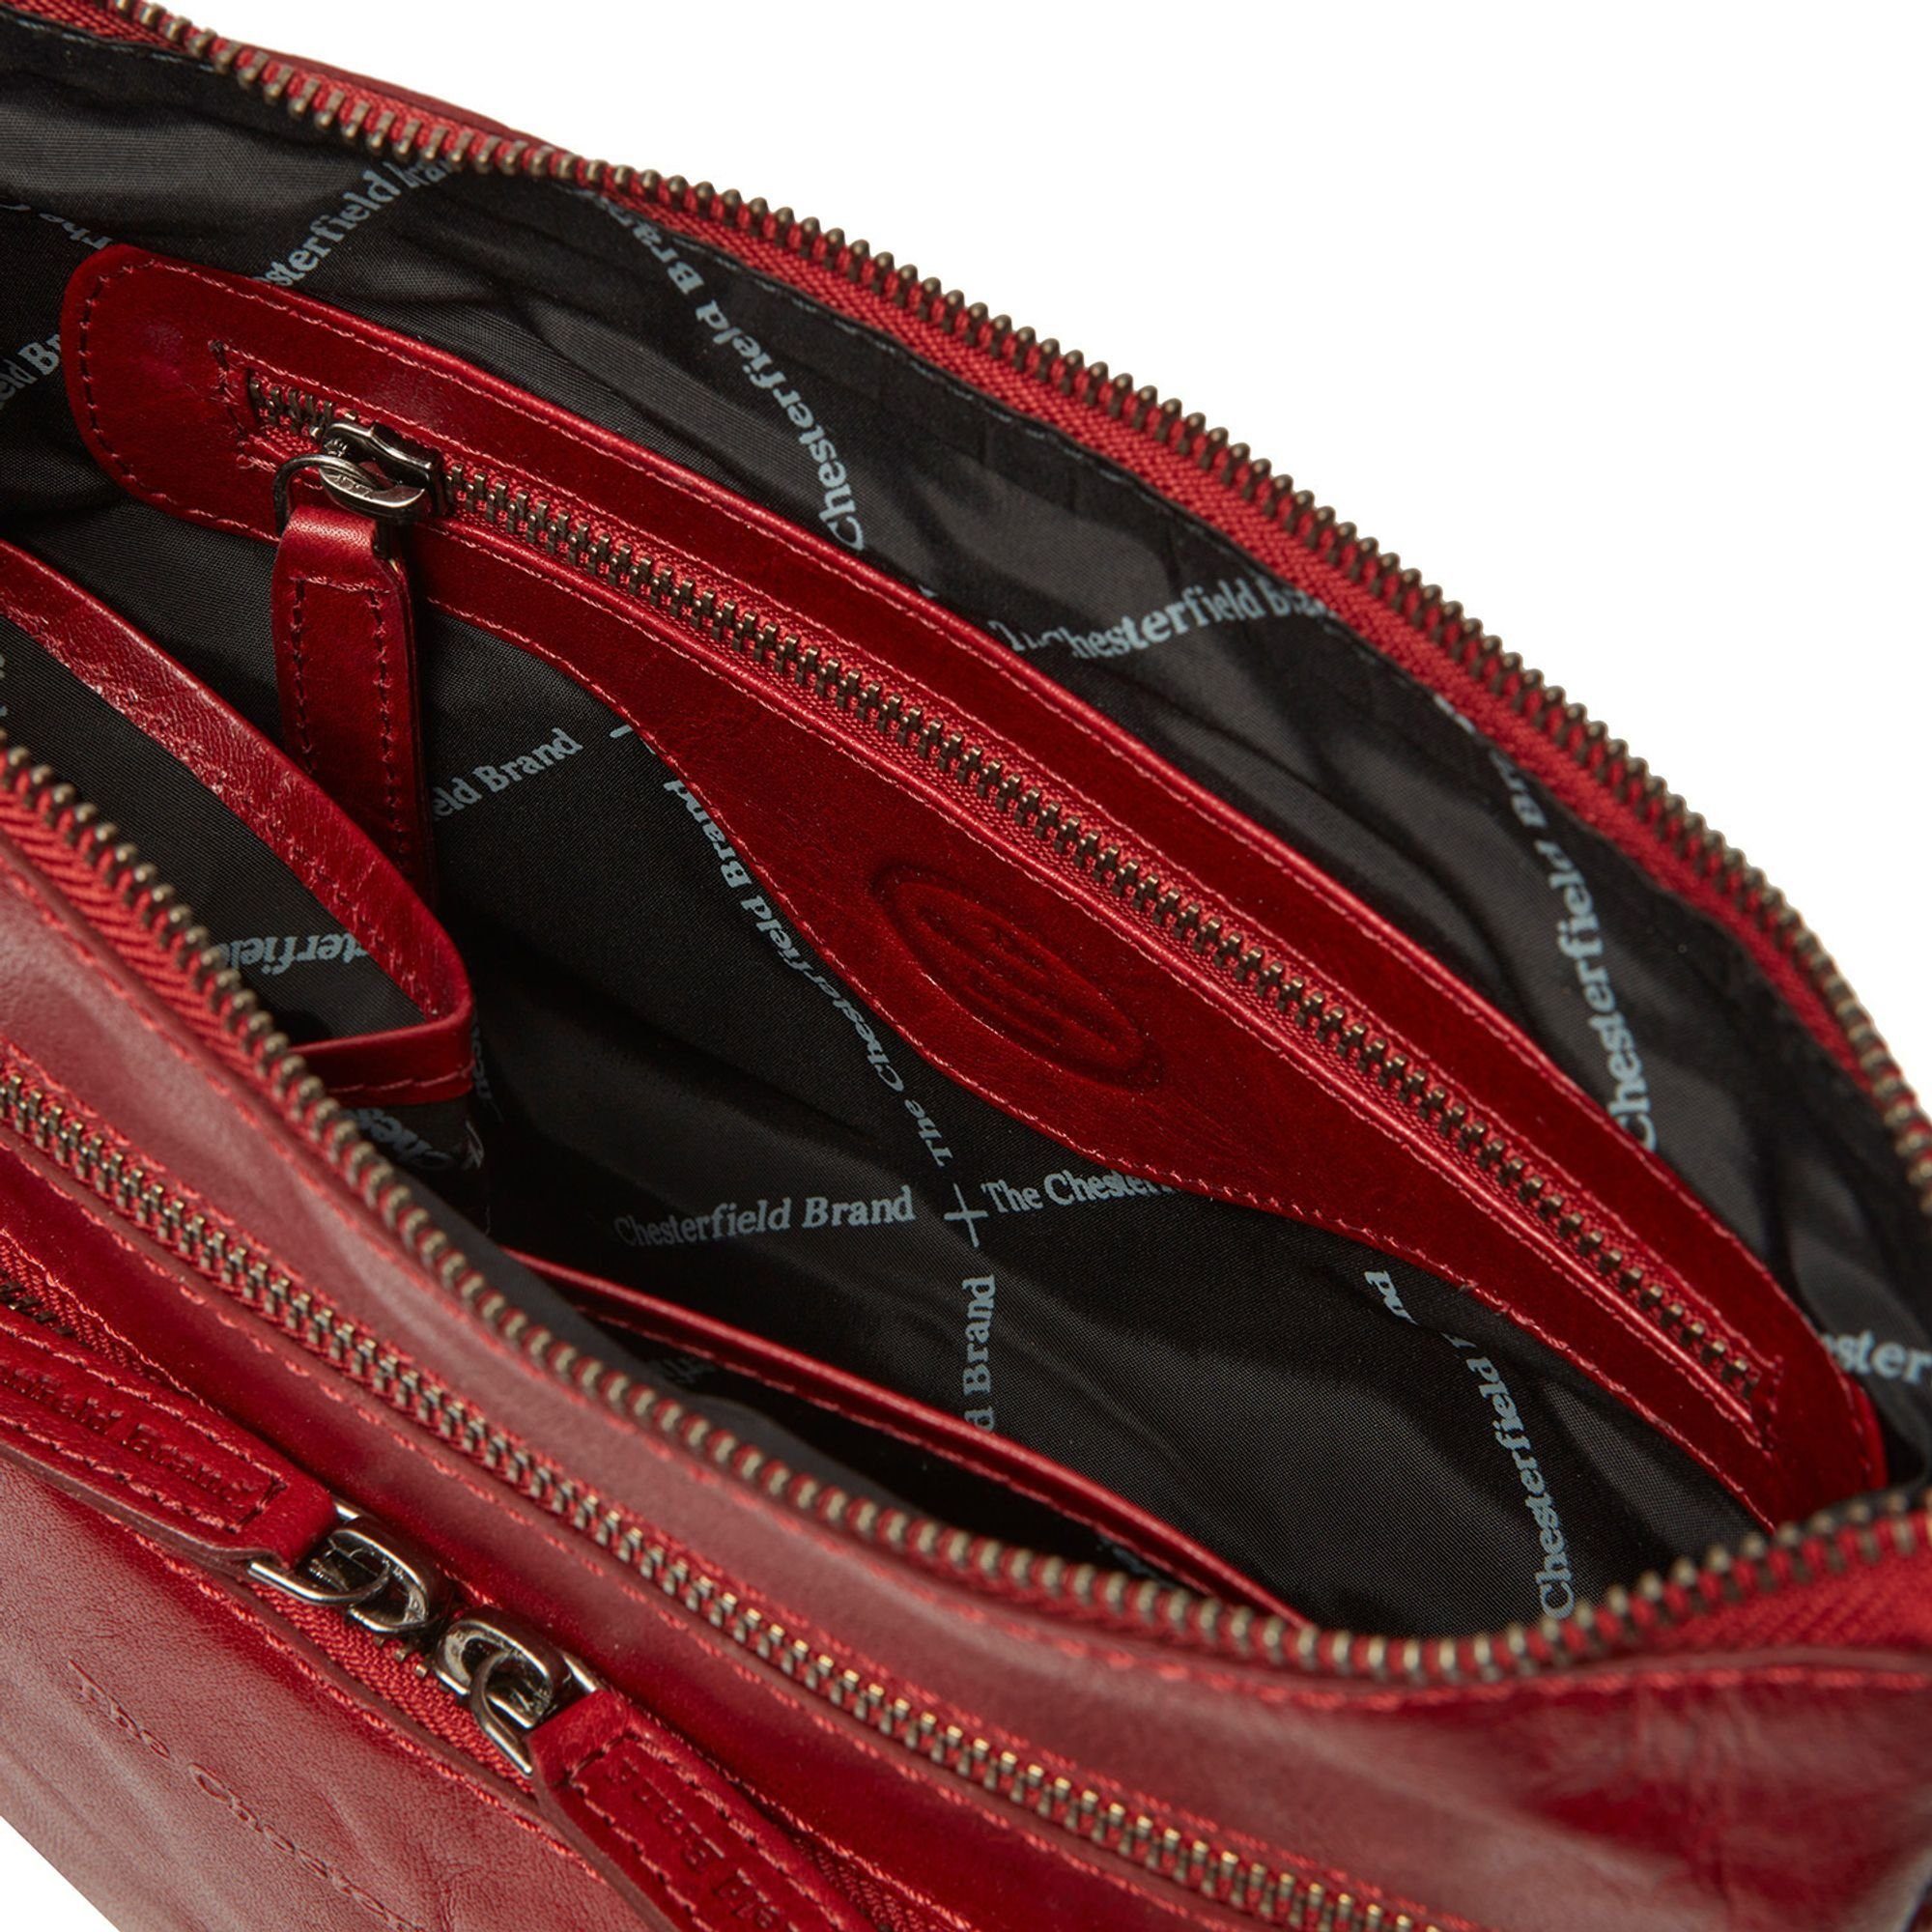 The Chesterfield Brand Schultertasche red Tula, Leder